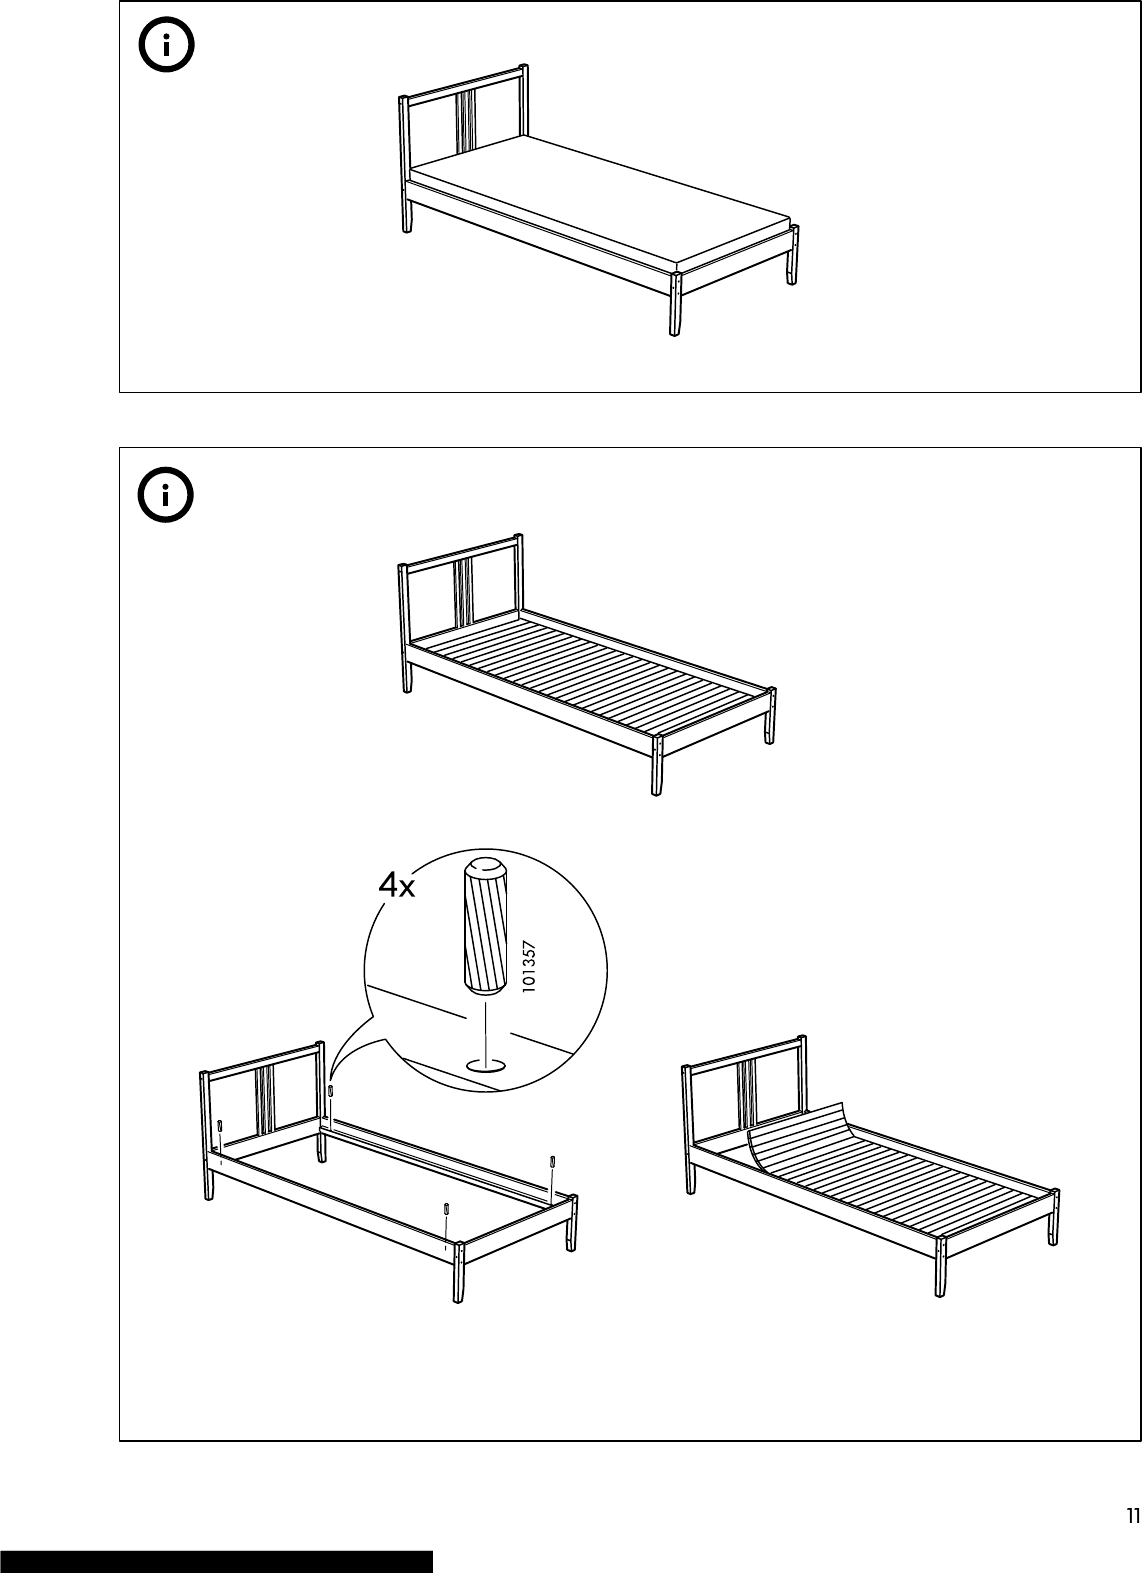 Page 11 of 12 - Ikea Ikea-Fjellse-Bed-Frame-Tw-Instructions-Manual-822426 ManualsLib - Makes It Easy To Find Manuals Online! User Manual